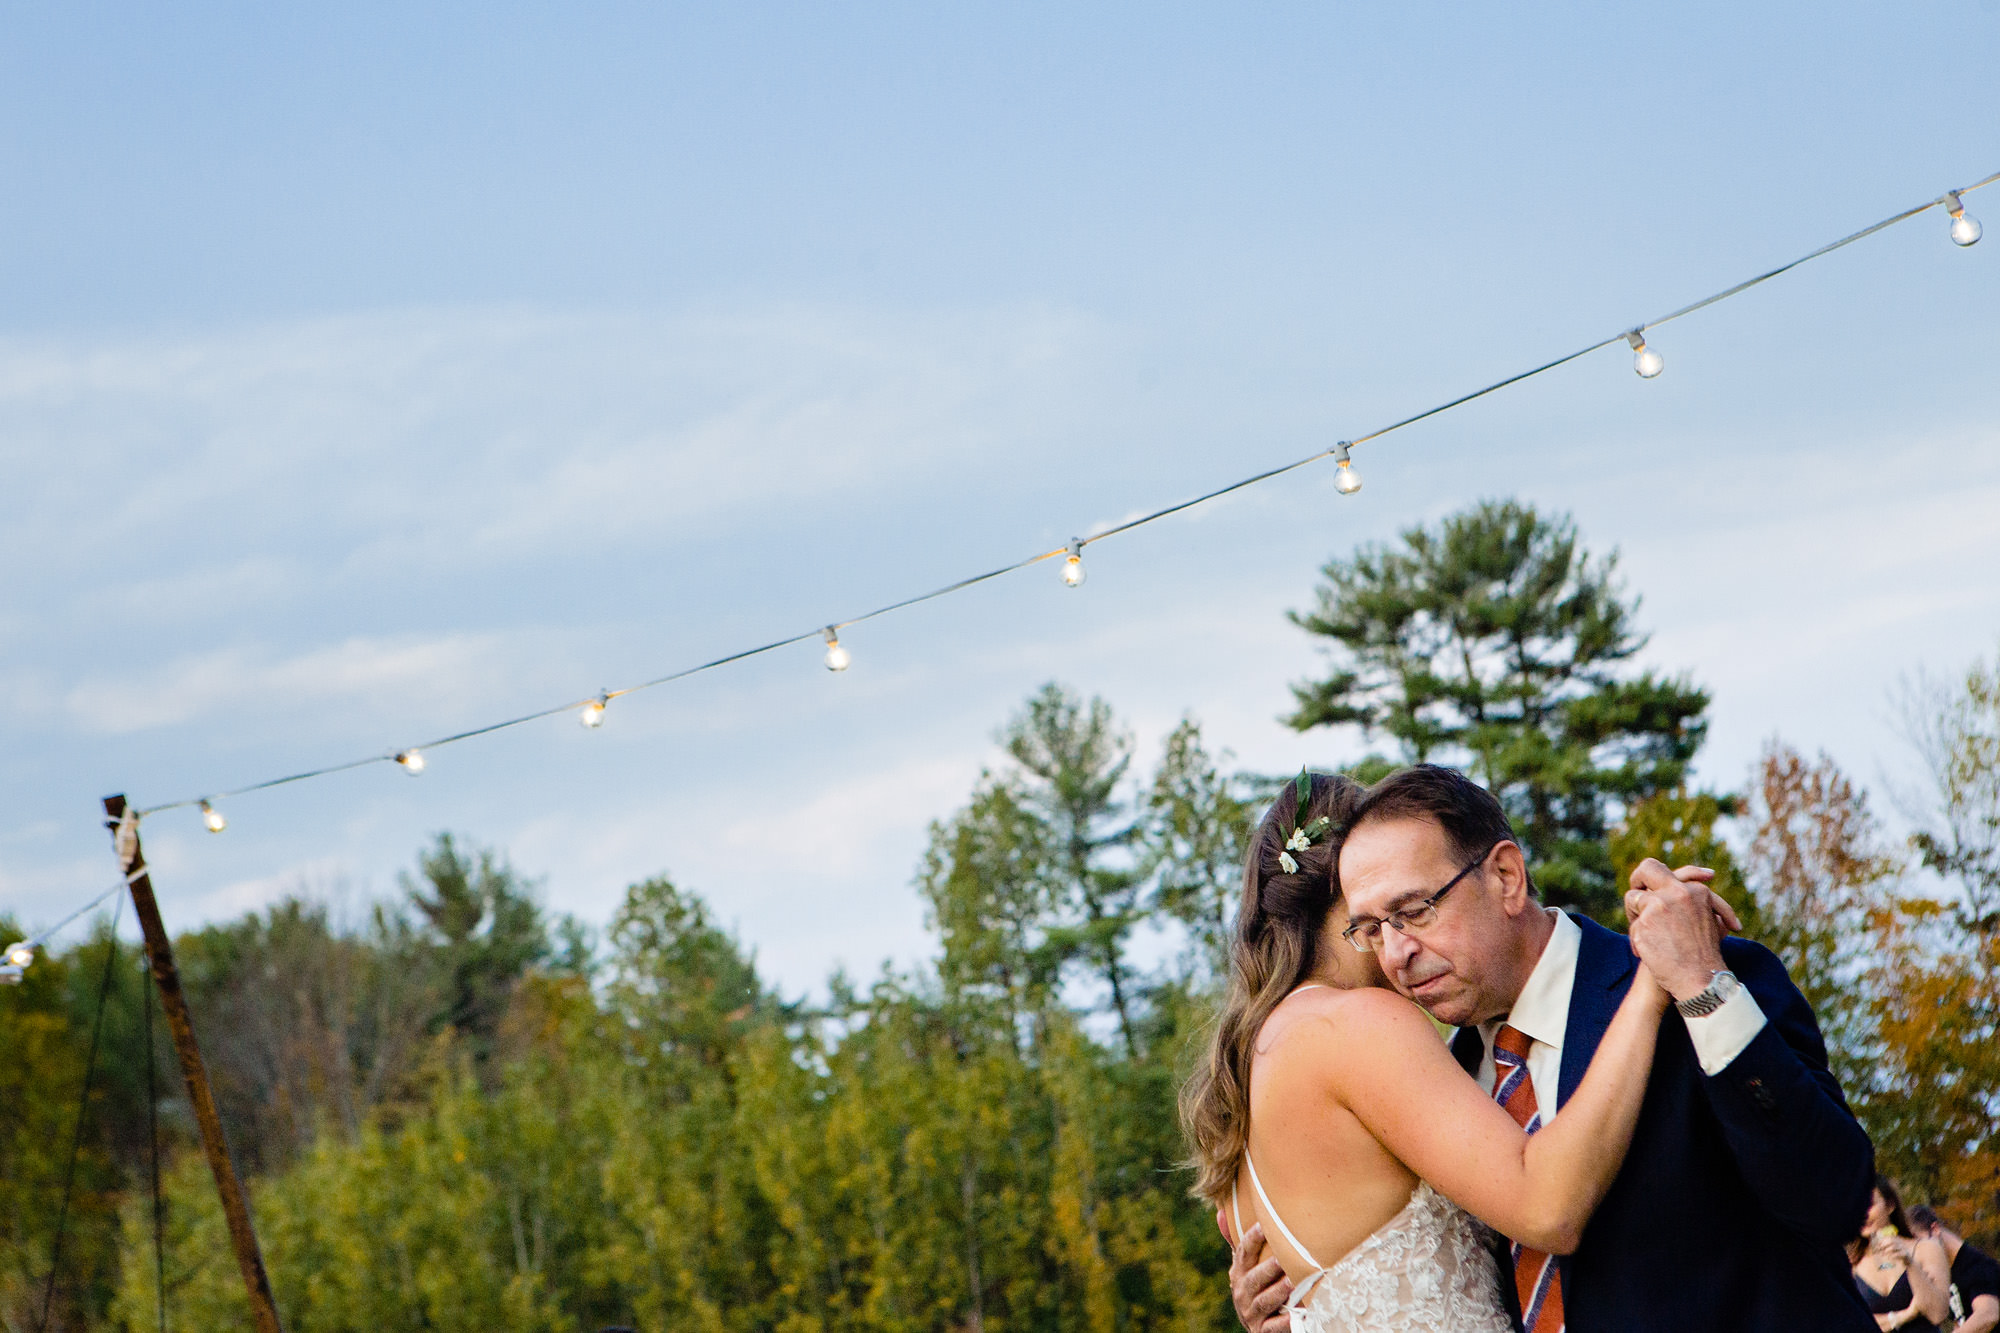 The bride shares a first dance with her father at her wedding in Maine